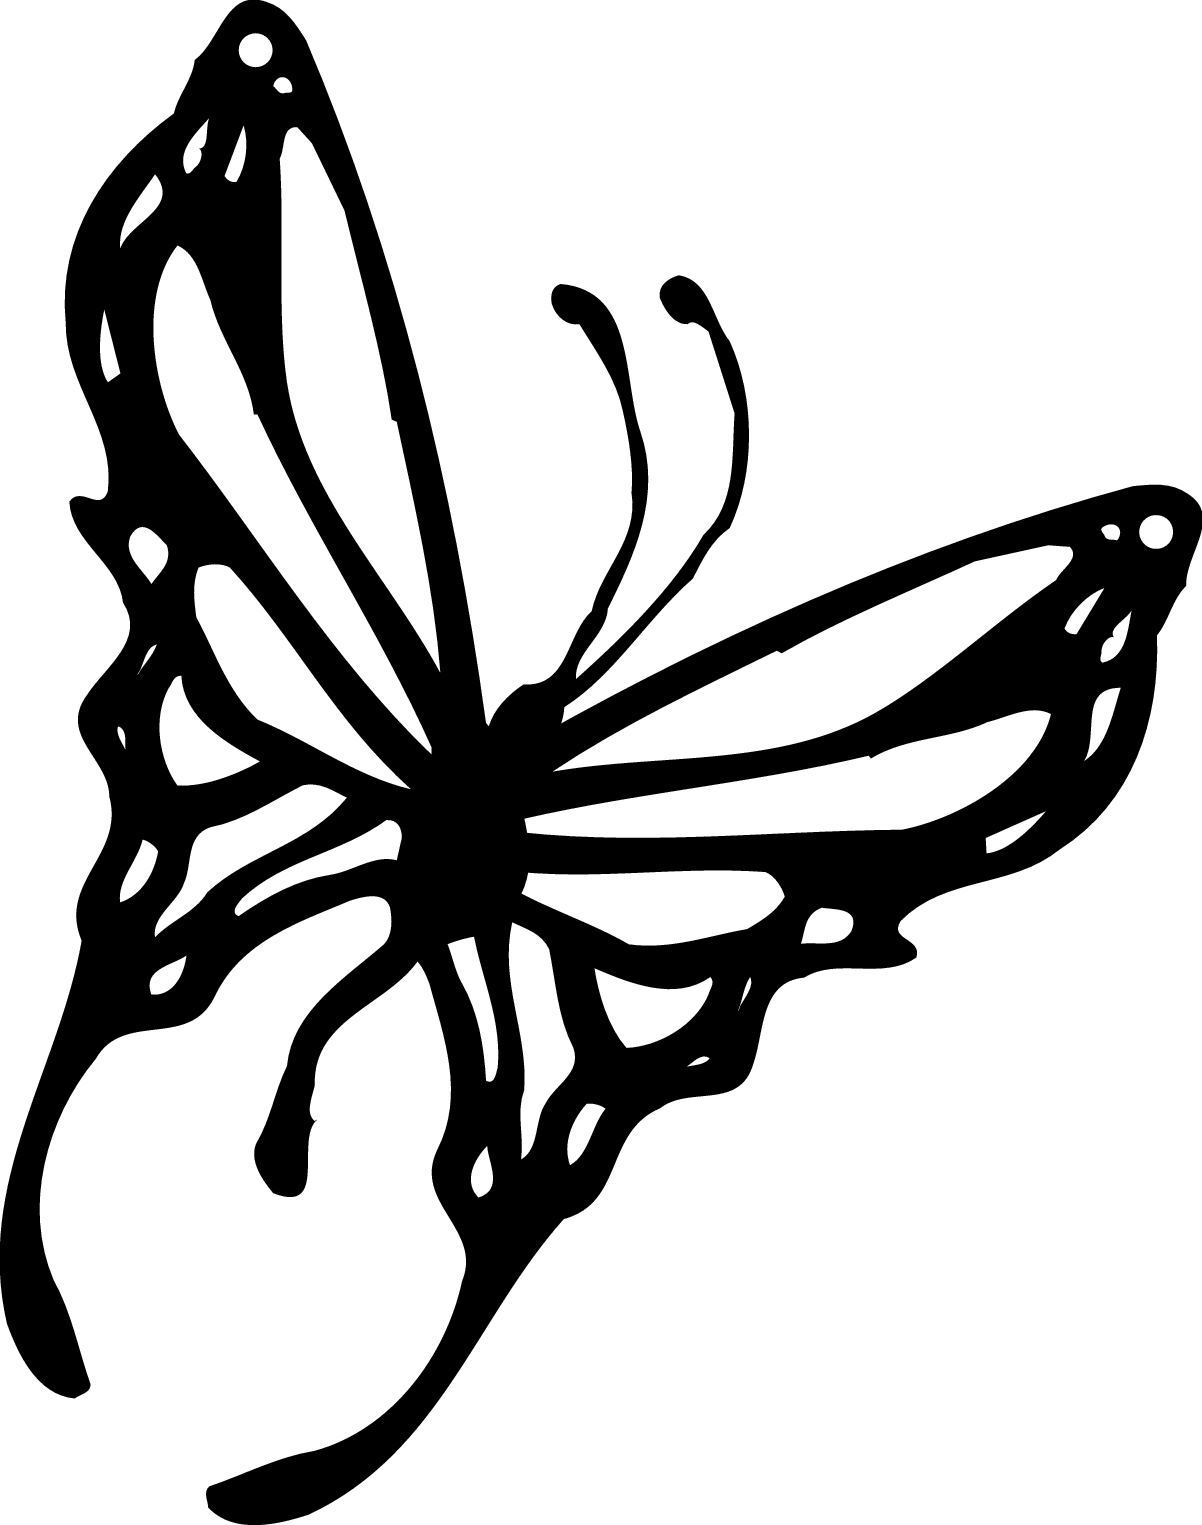 Butterfly Black And White Clip Art - ClipArt Best